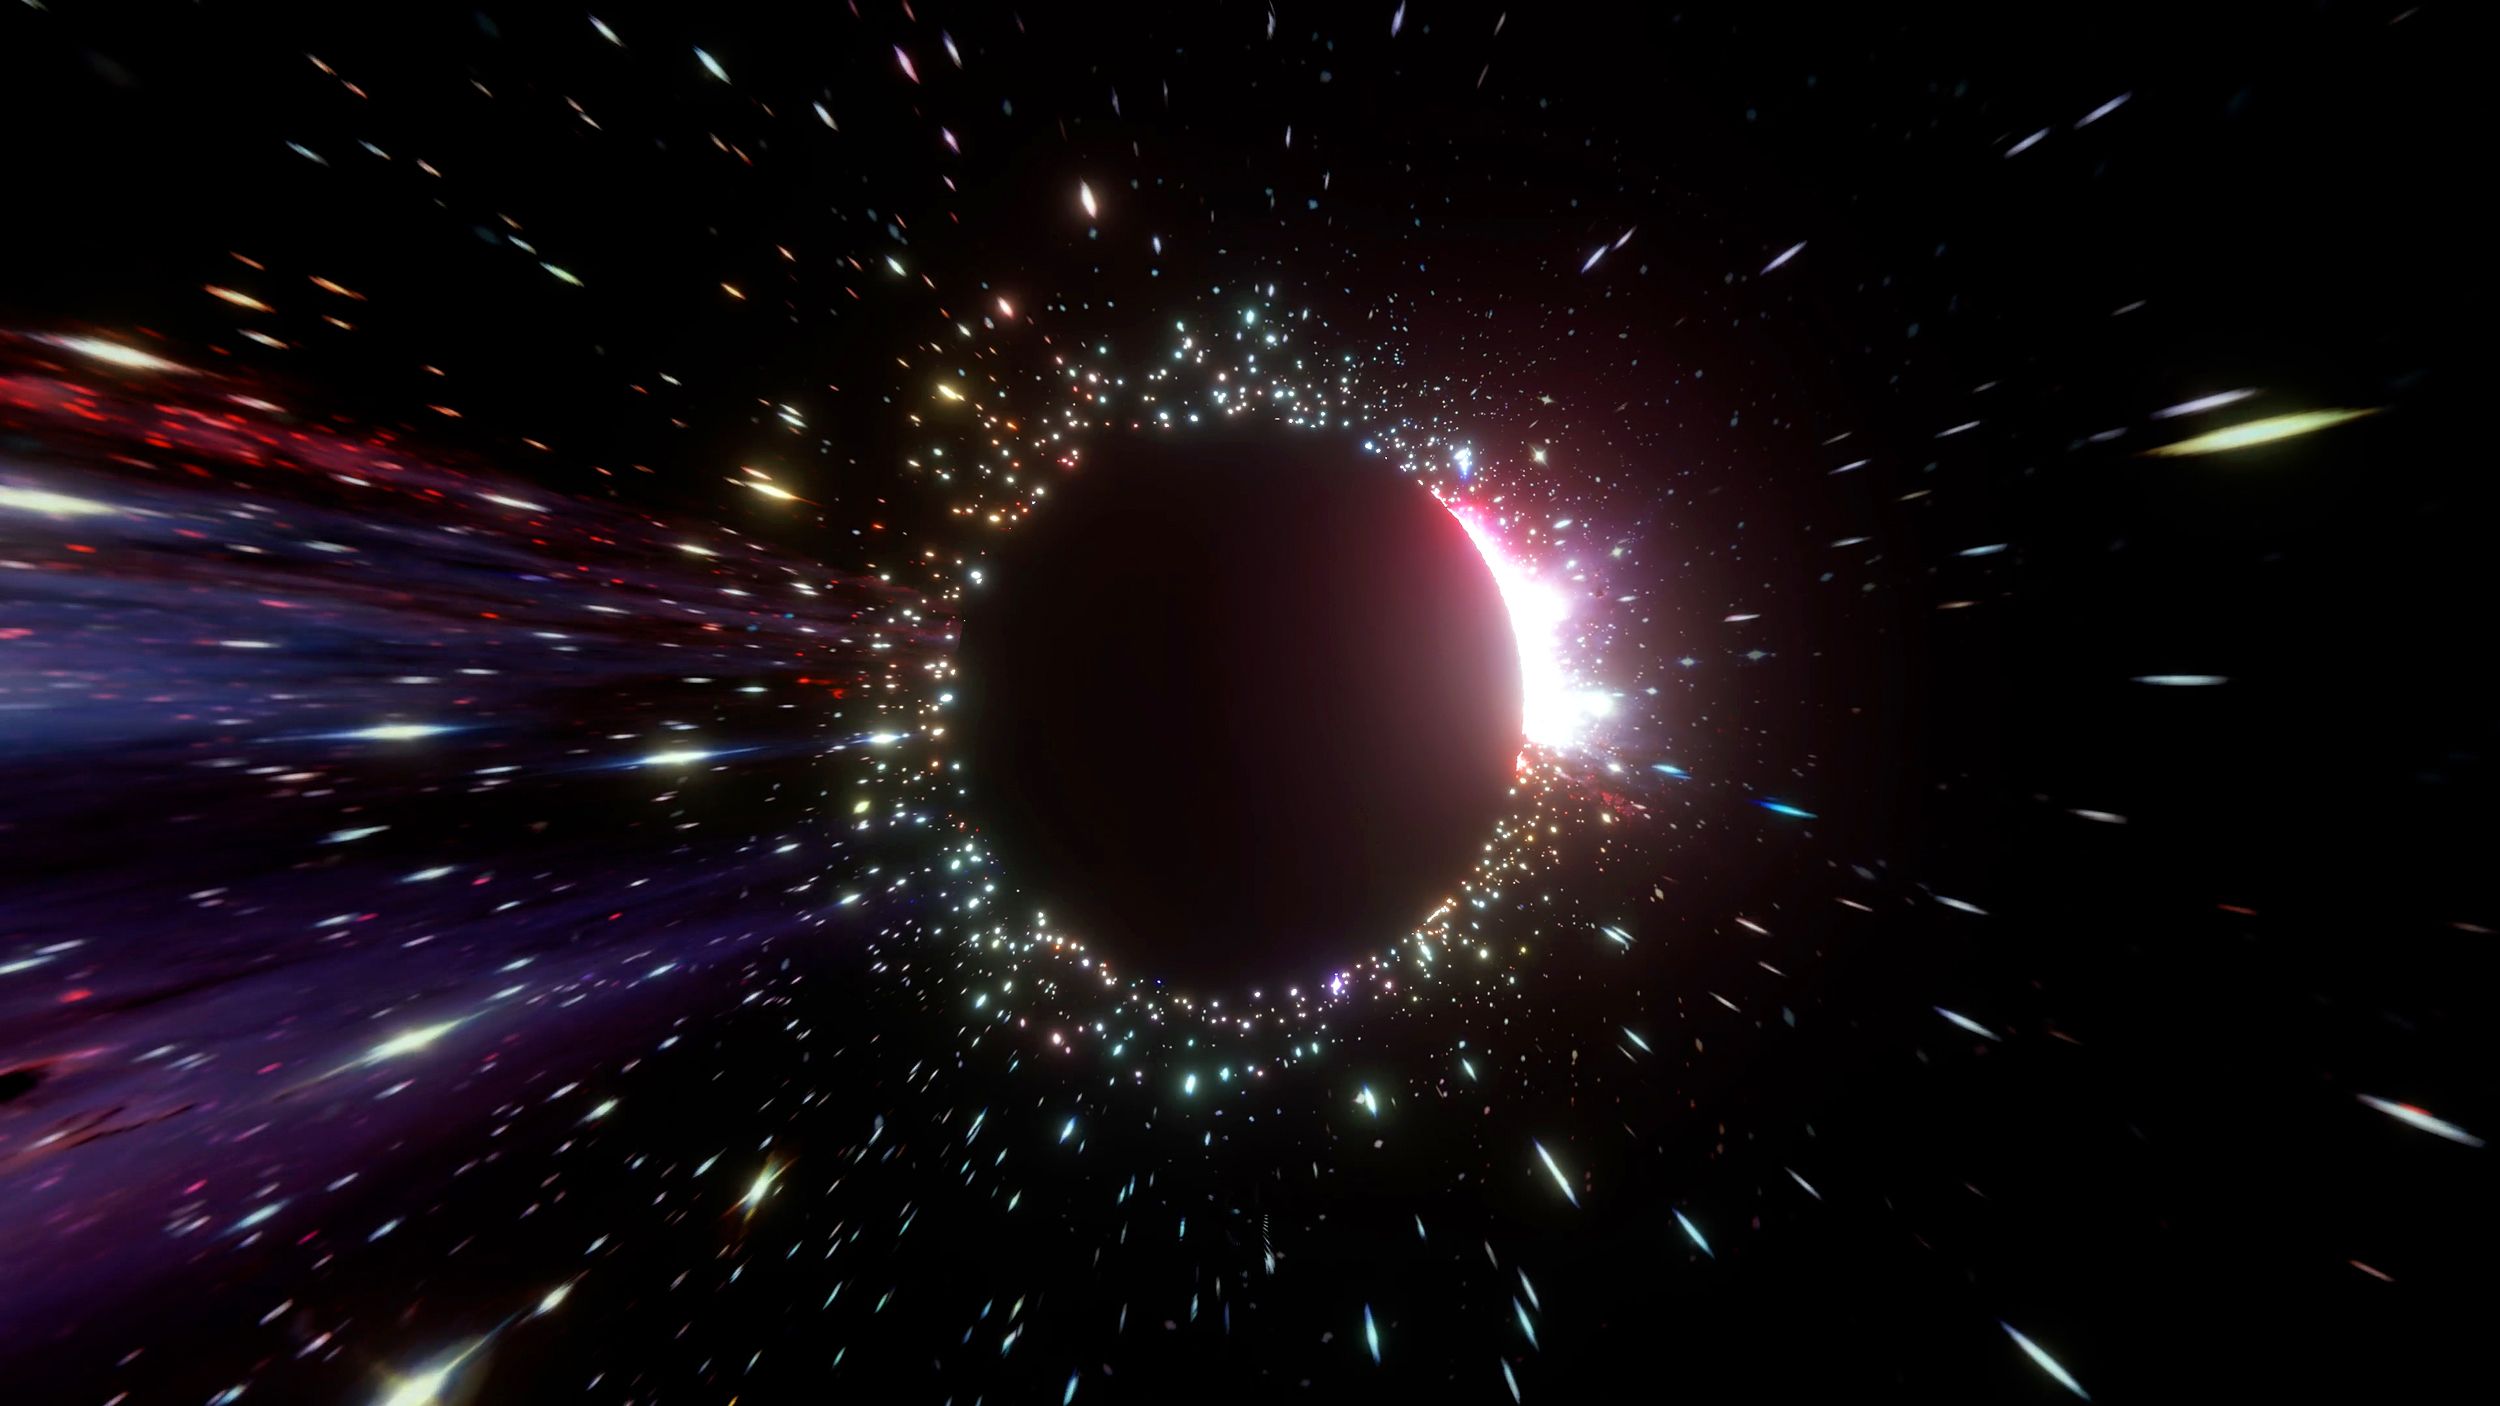 Our universe might have been born from a black hole in another cosmos, not a Big Bang